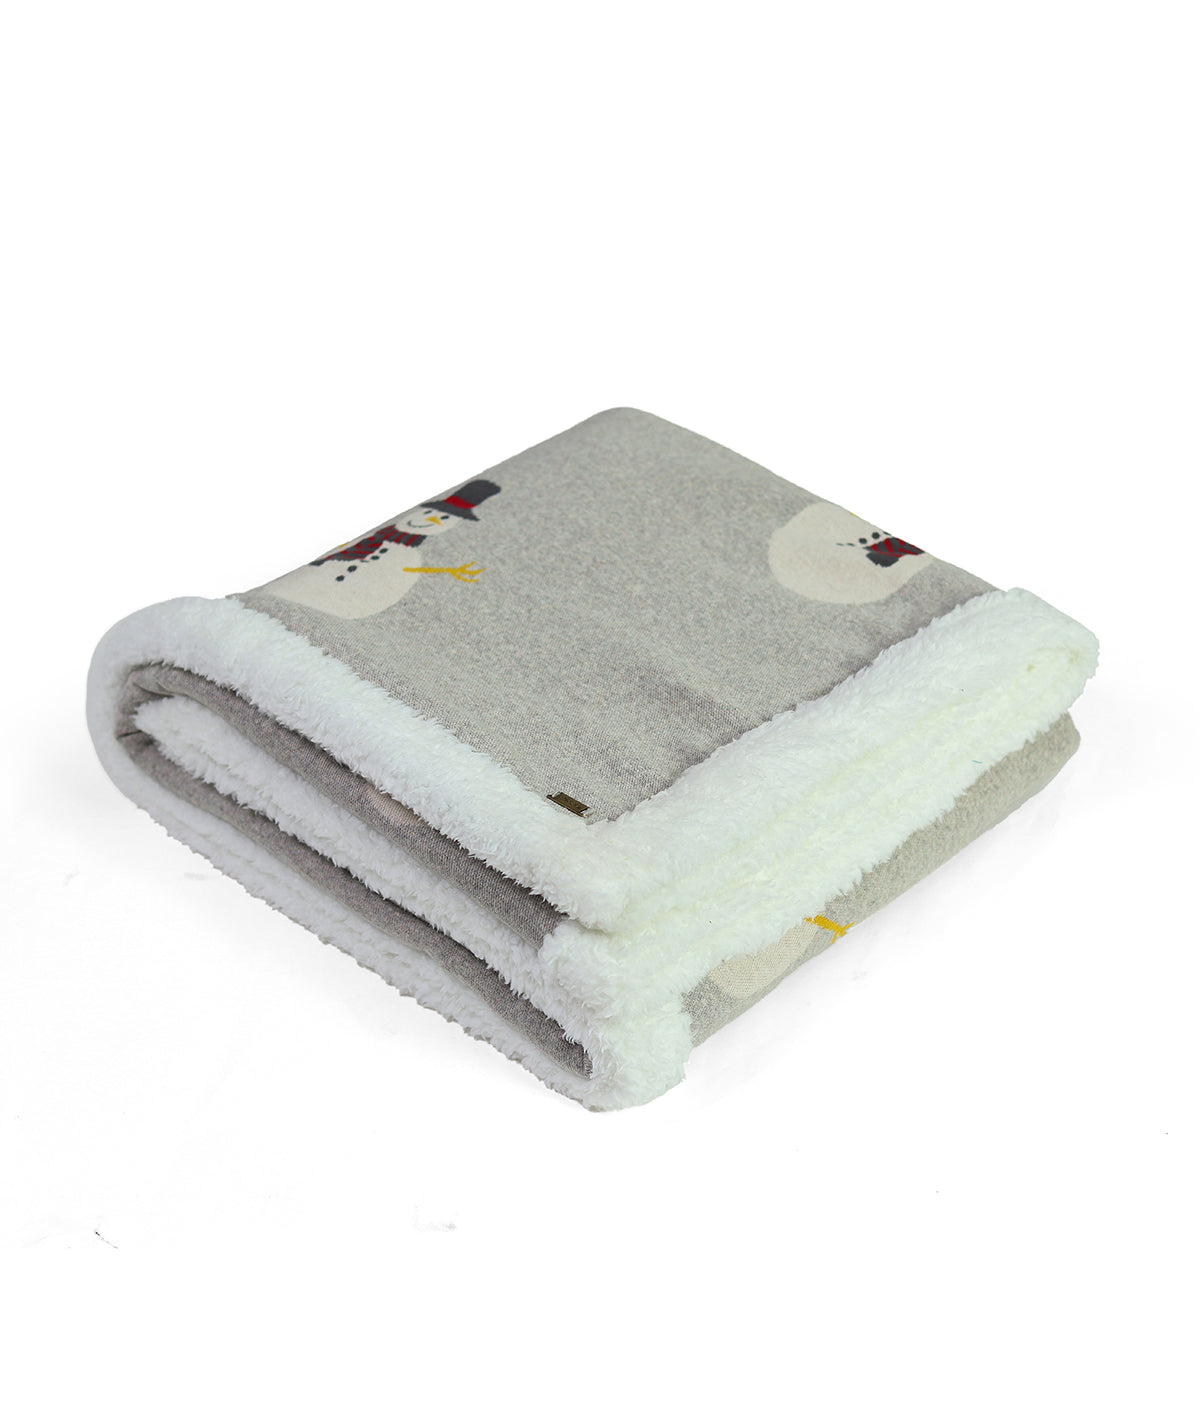 Snowman Sherpa Cotton Knitted Kids Blanket with Warm Sherpa Fabric (Vanilla Grey & Natural)